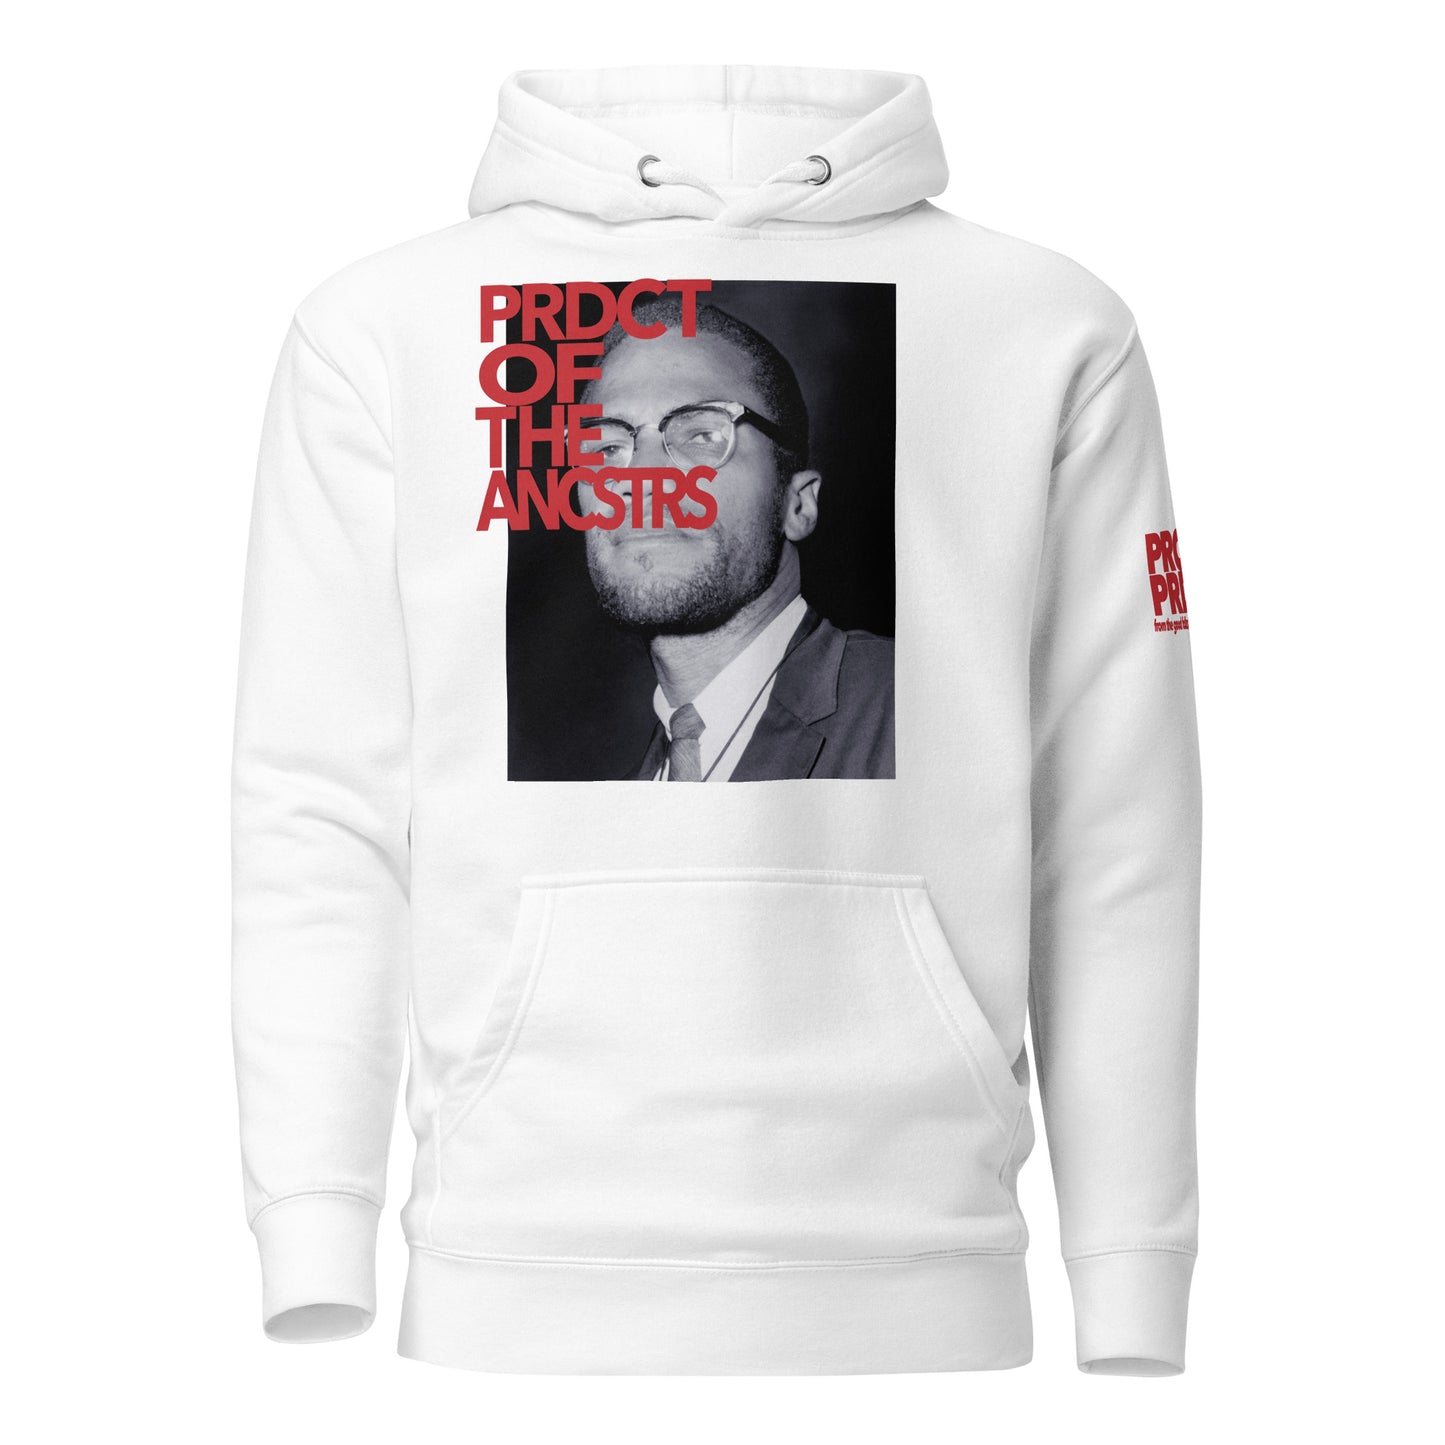 "Product of the Ancestors" Hoodie (Limited Edition)